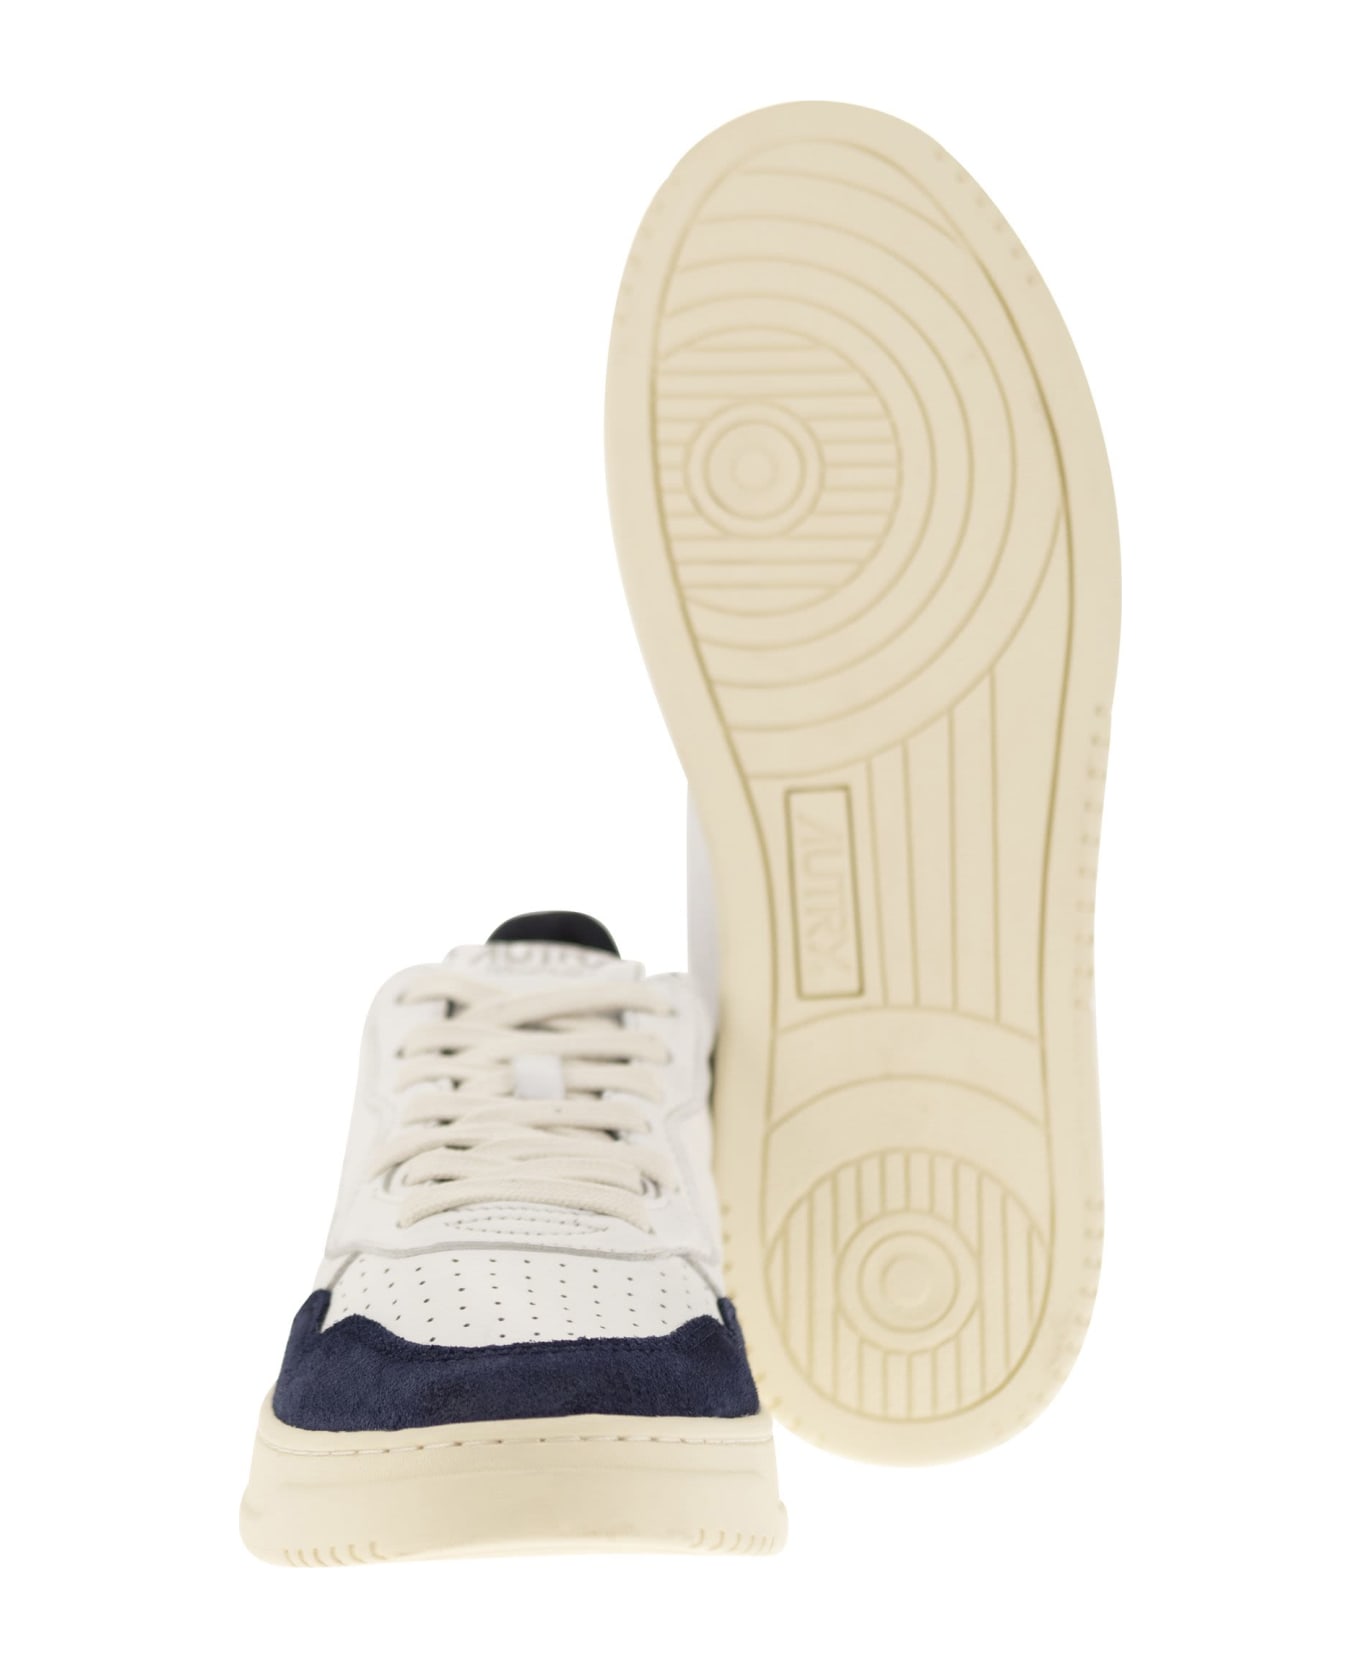 Autry Medalist Low Sneakers - WHITE/BLU